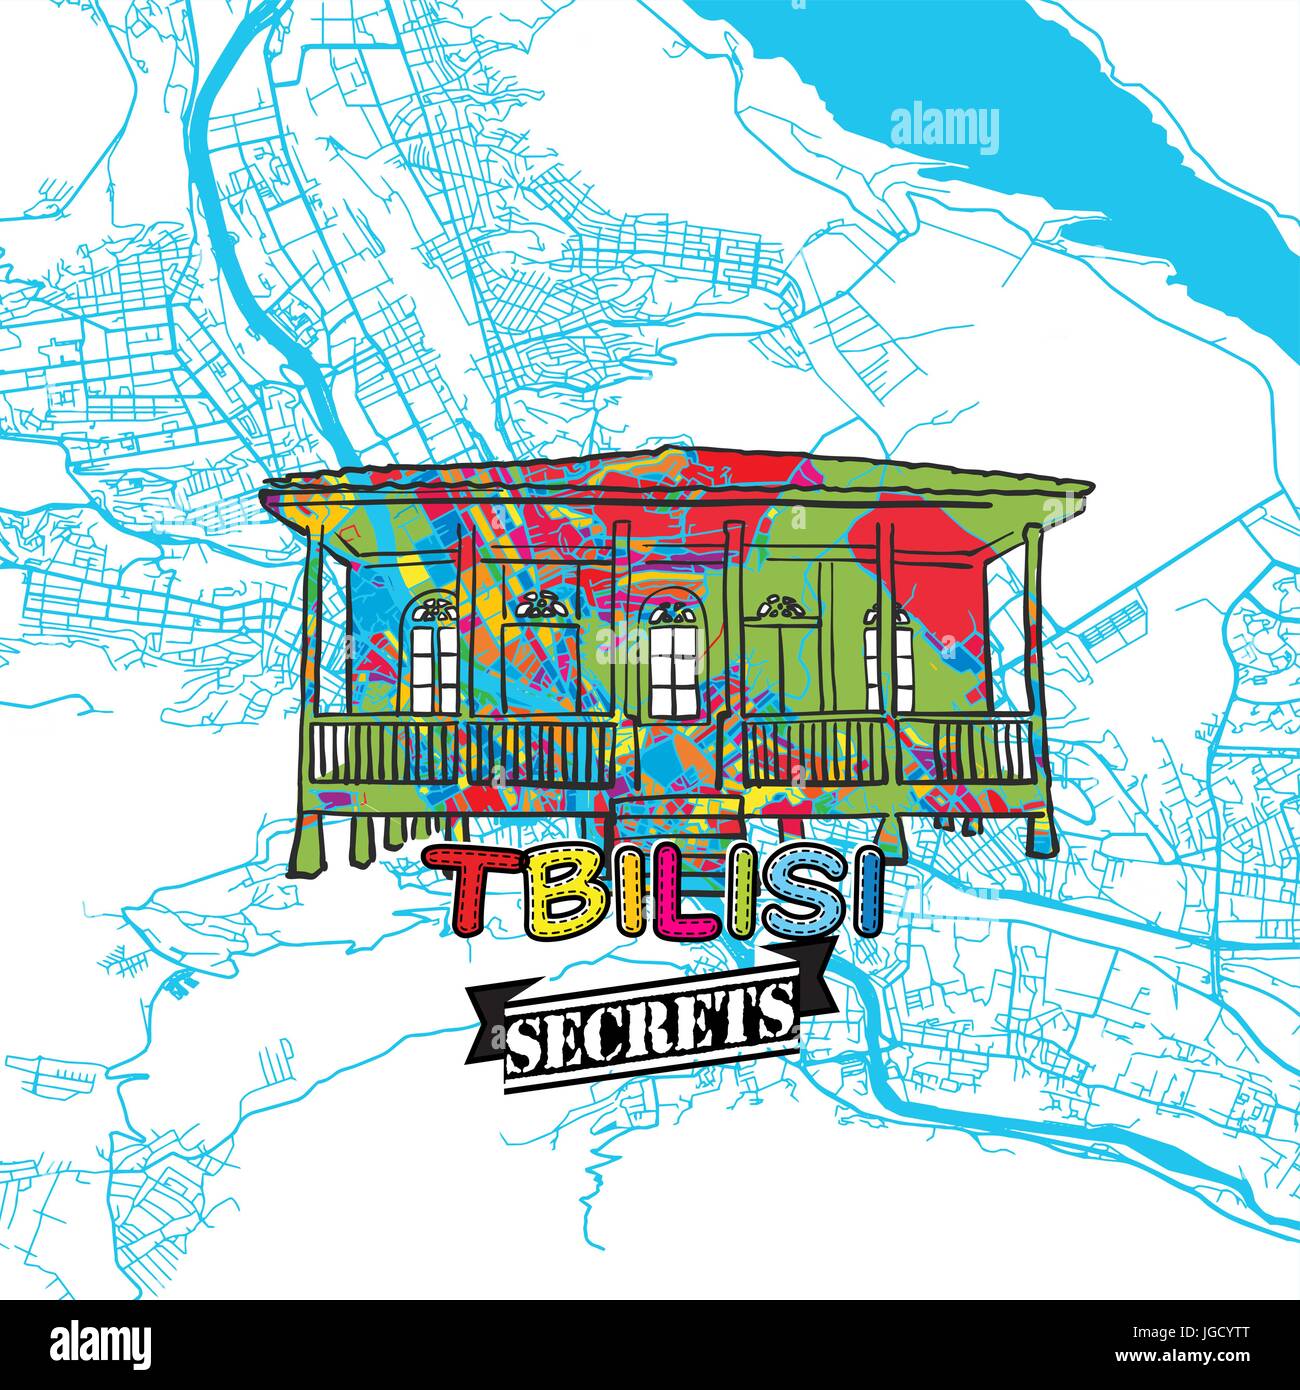 Tbilisi Travel Secrets Art Map for mapping experts and travel guides. Handmade city logo, typo badge and hand drawn vector image on top are grouped an Stock Vector